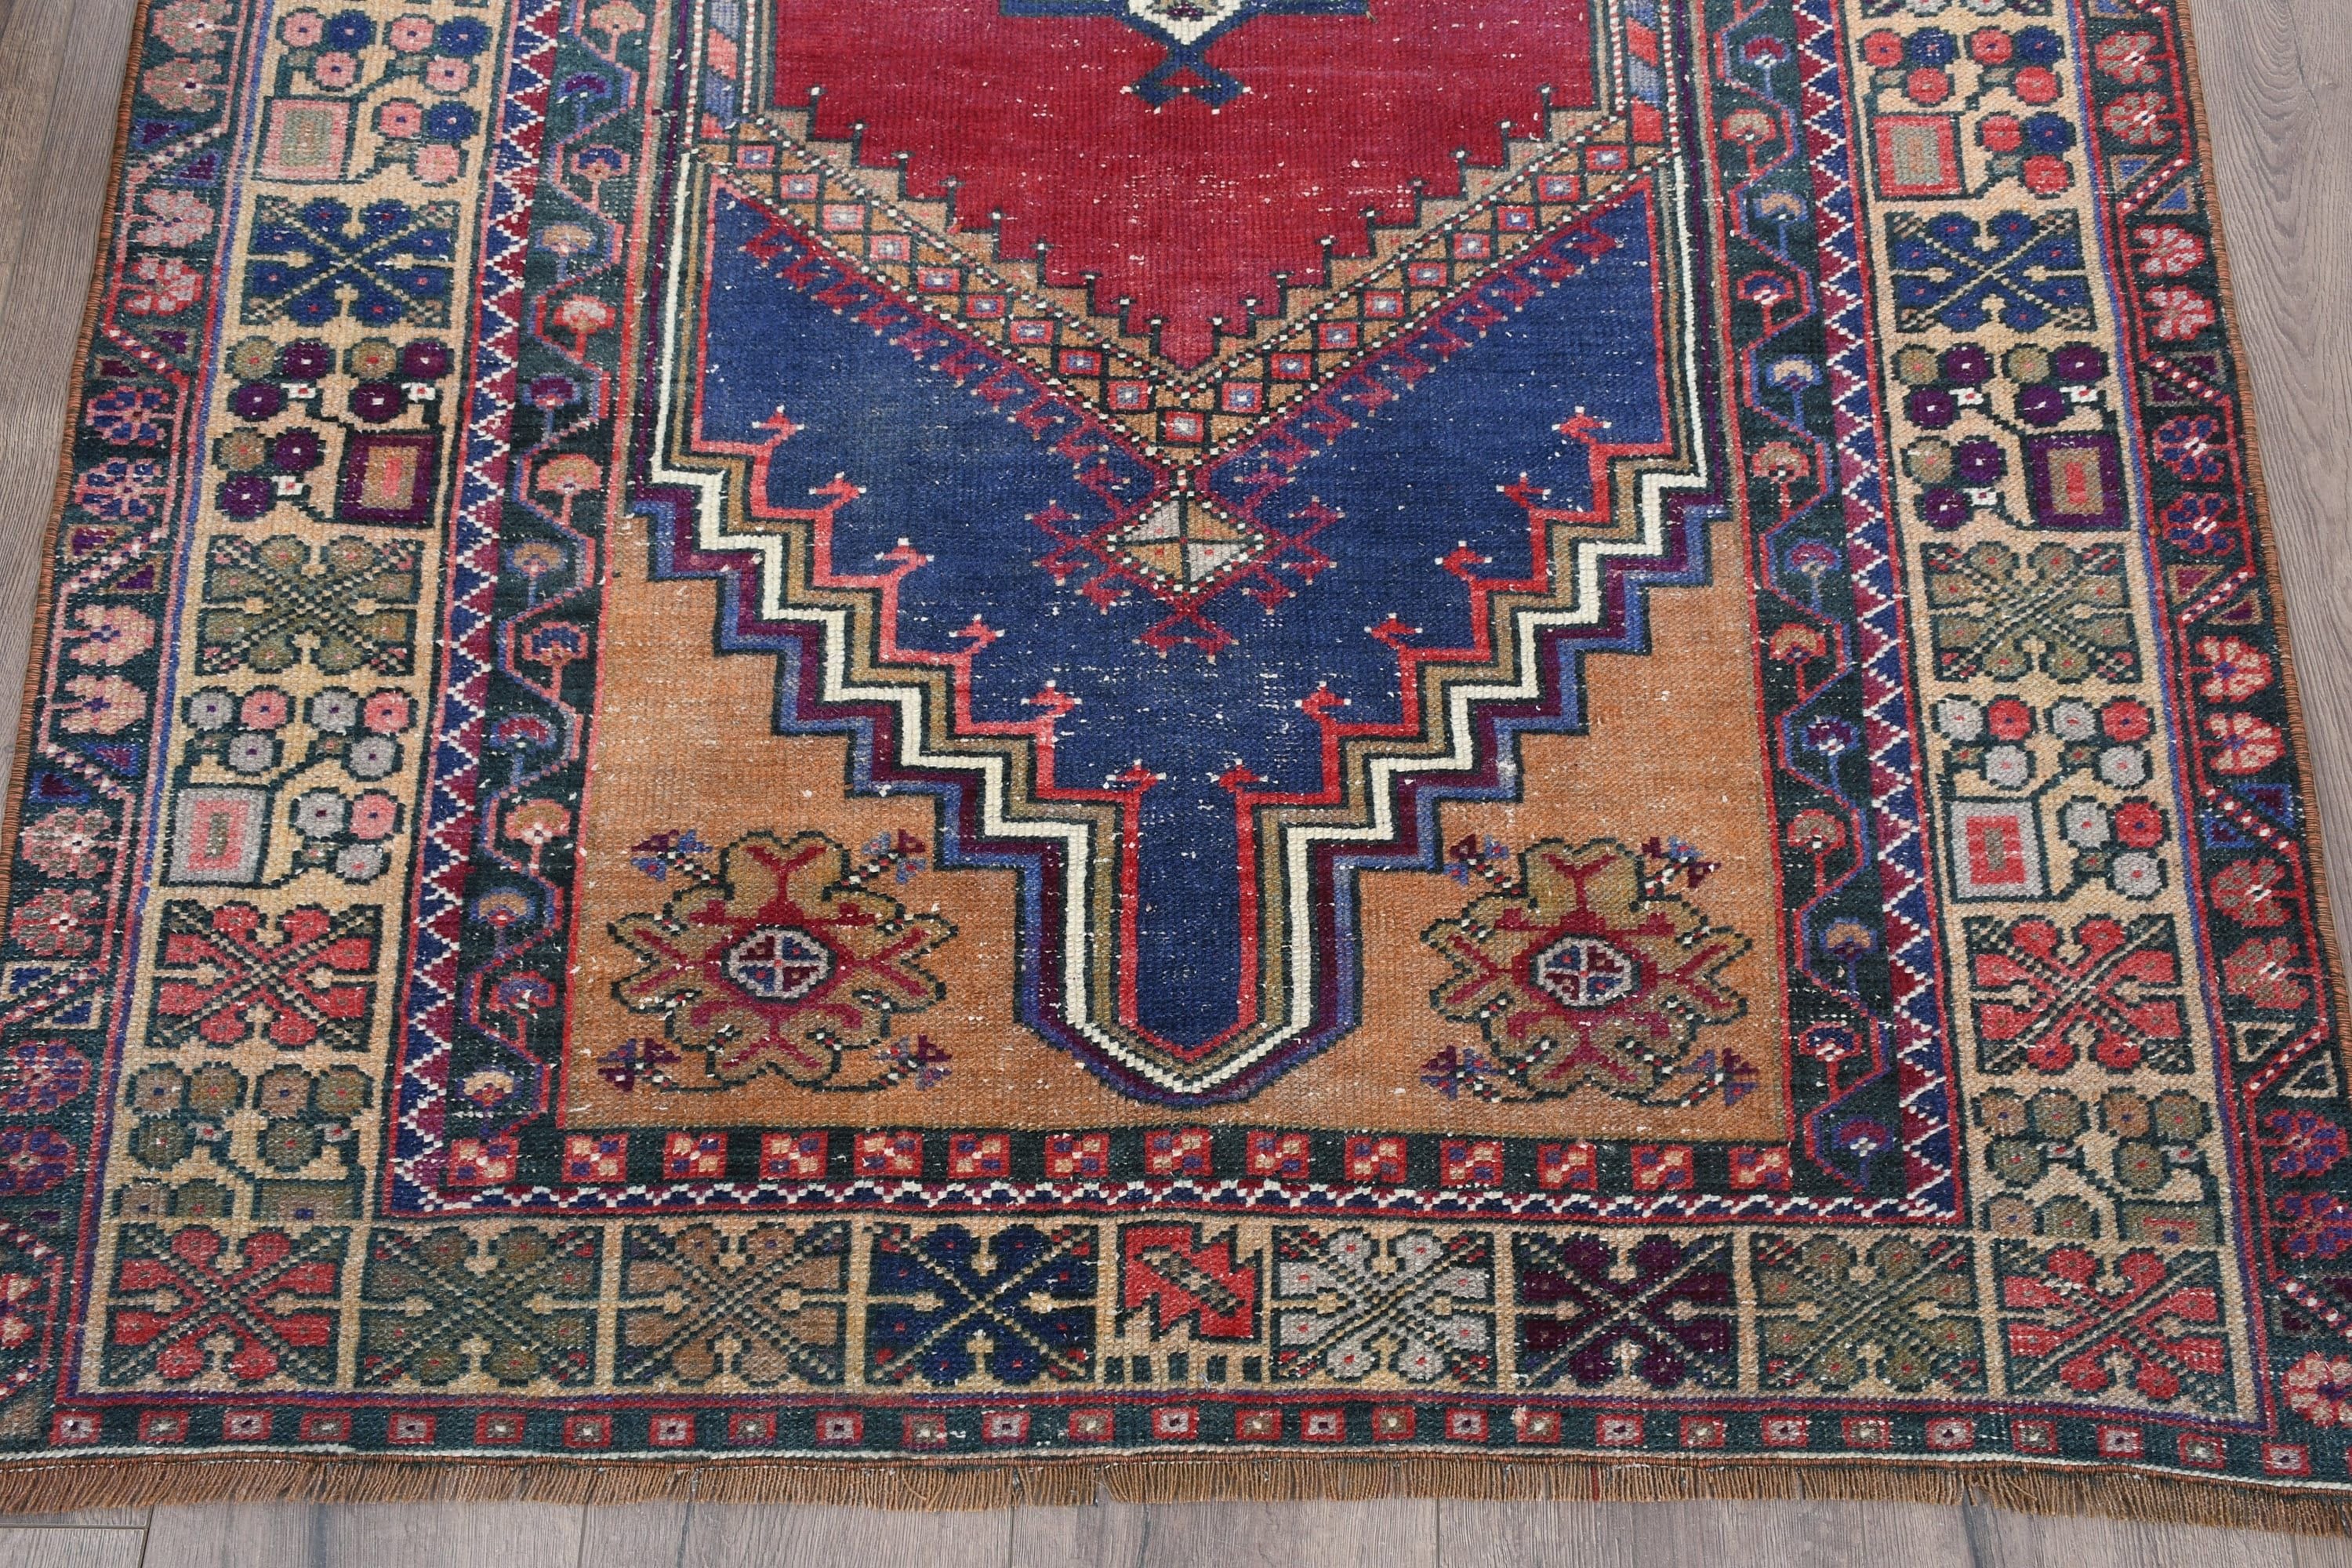 Vintage Rugs, Antique Rugs, Anatolian Rug, Rugs for Area, Turkish Rugs, Red Floor Rugs, Bedroom Rug, Muted Rugs, 3.8x6.5 ft Area Rug